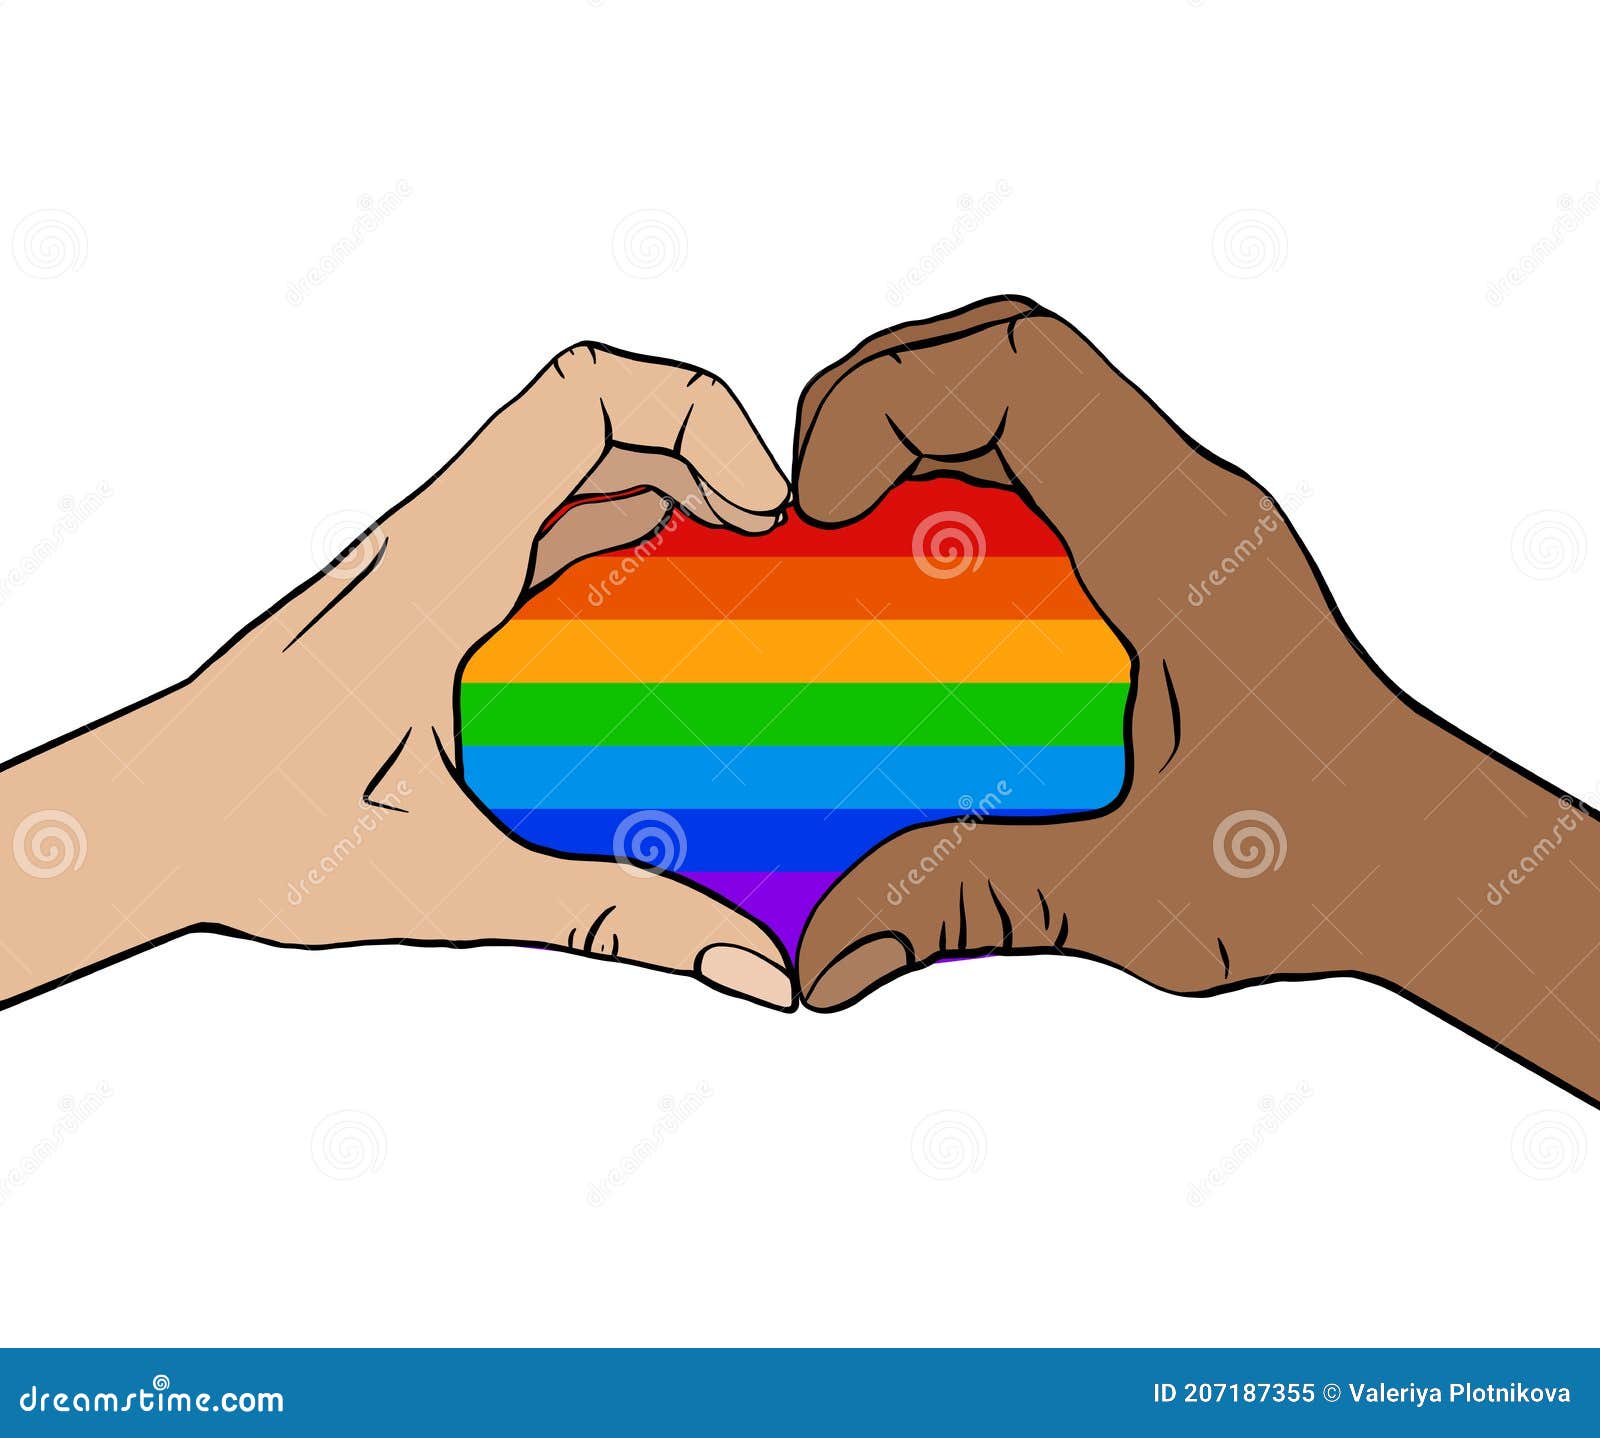 Outline Illustration Of A Pair Of Human Hands In Rainbow Heart Greeting Card Love Of Same Sex